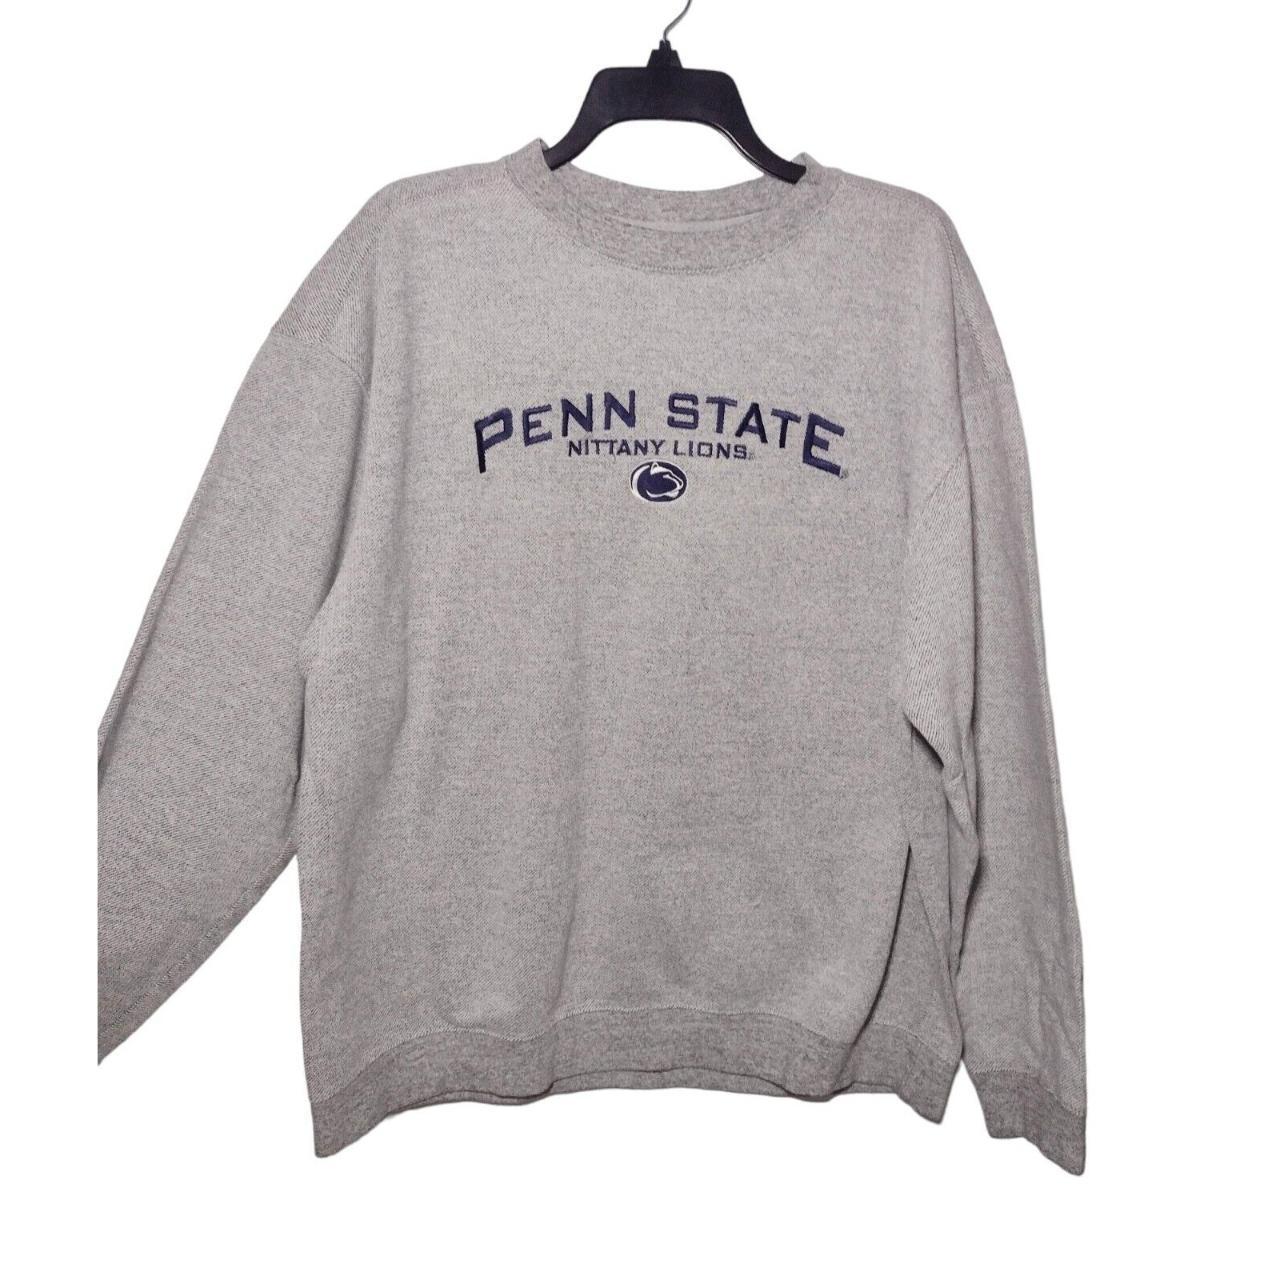 Vintage Penn State Nittany Lions Cotton Twill... - Depop